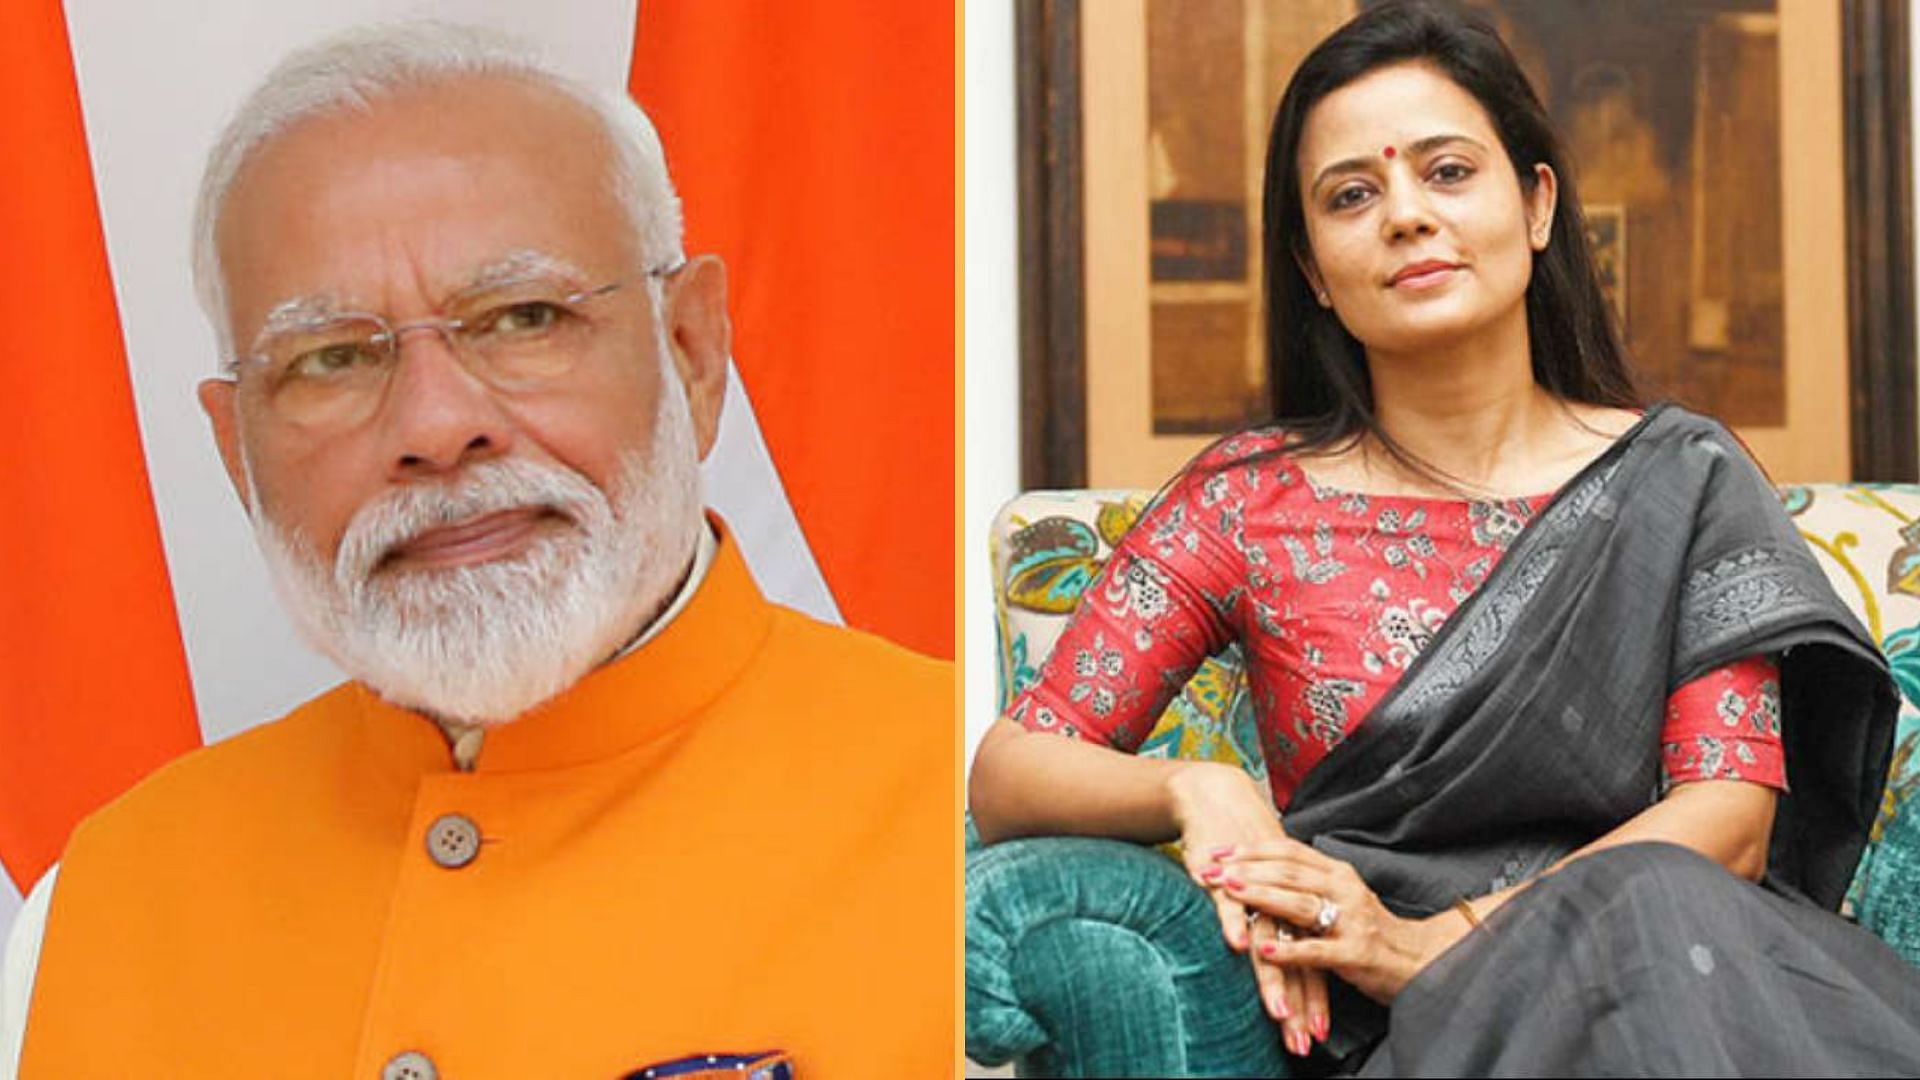 <div class="paragraphs"><p>Modi's address triggered a fresh war of words between the BJP and TMC, with MP Mahua Moitra and Amit Malviya exchanging barbs on Twitter.</p></div>